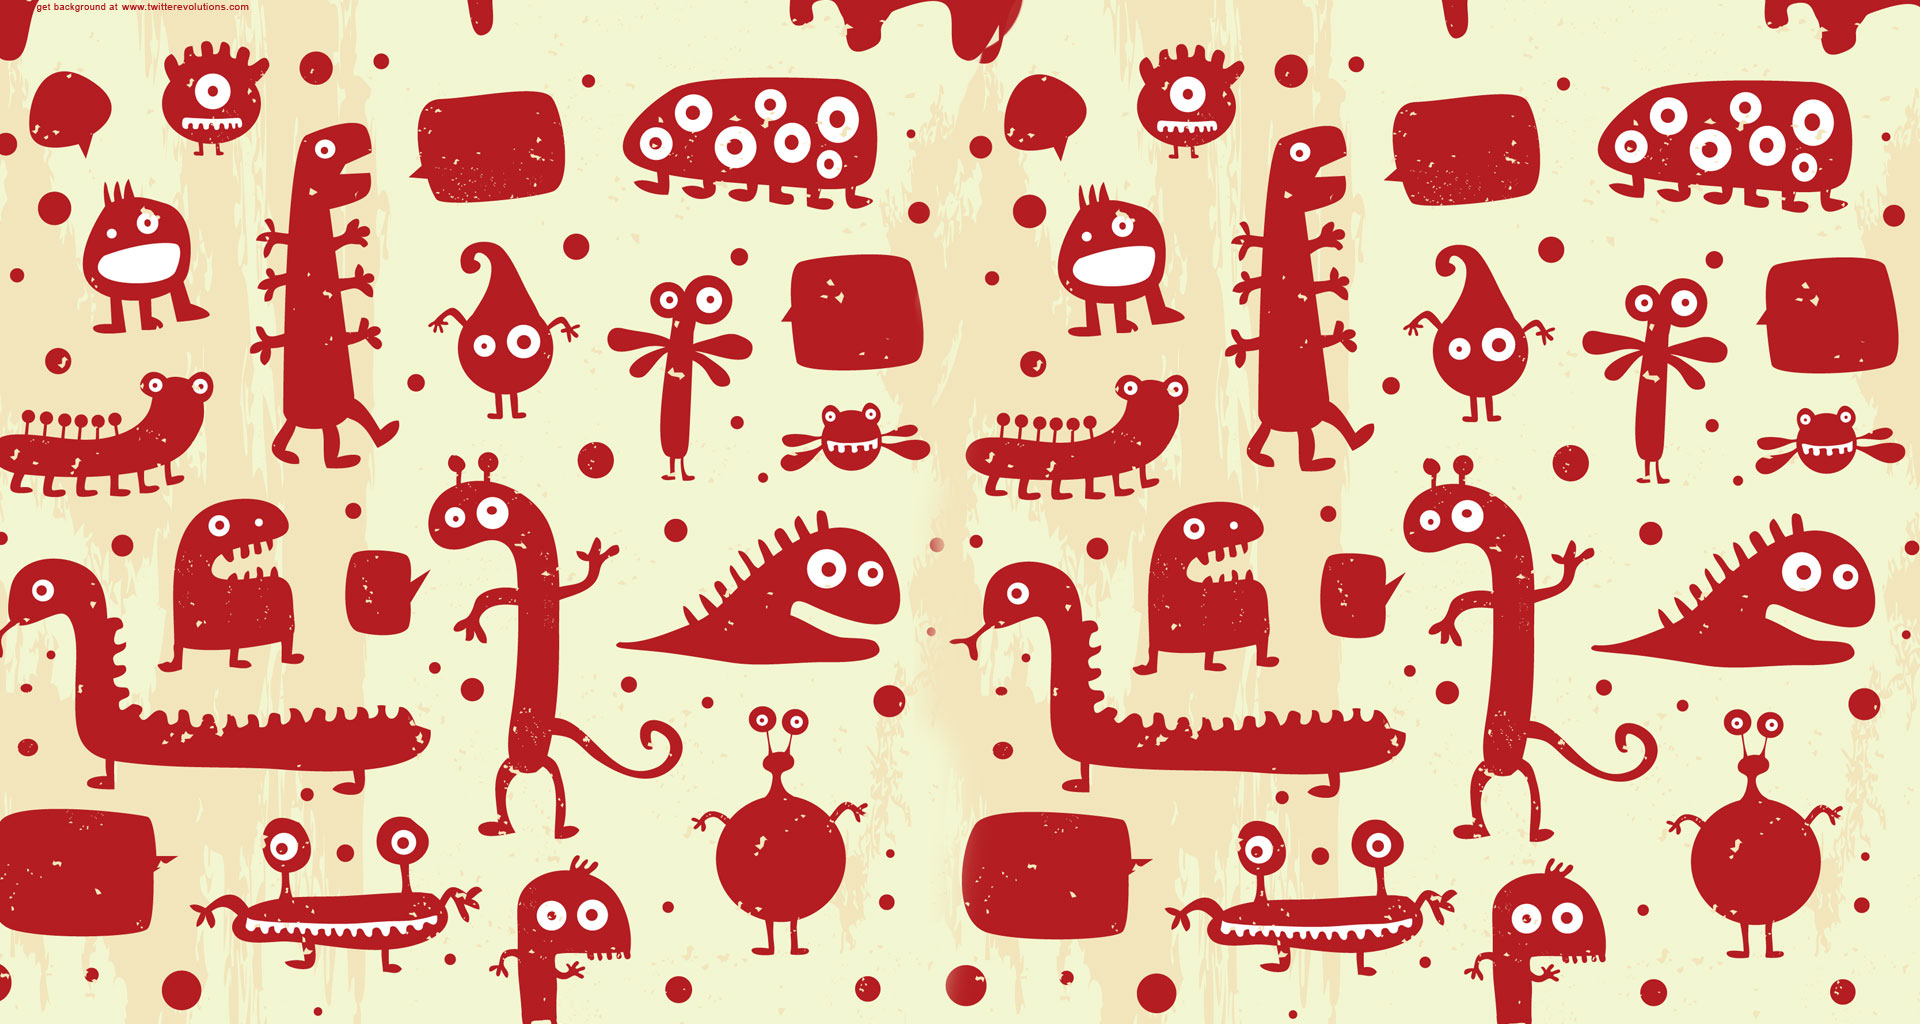 twitter backgrounds doodle